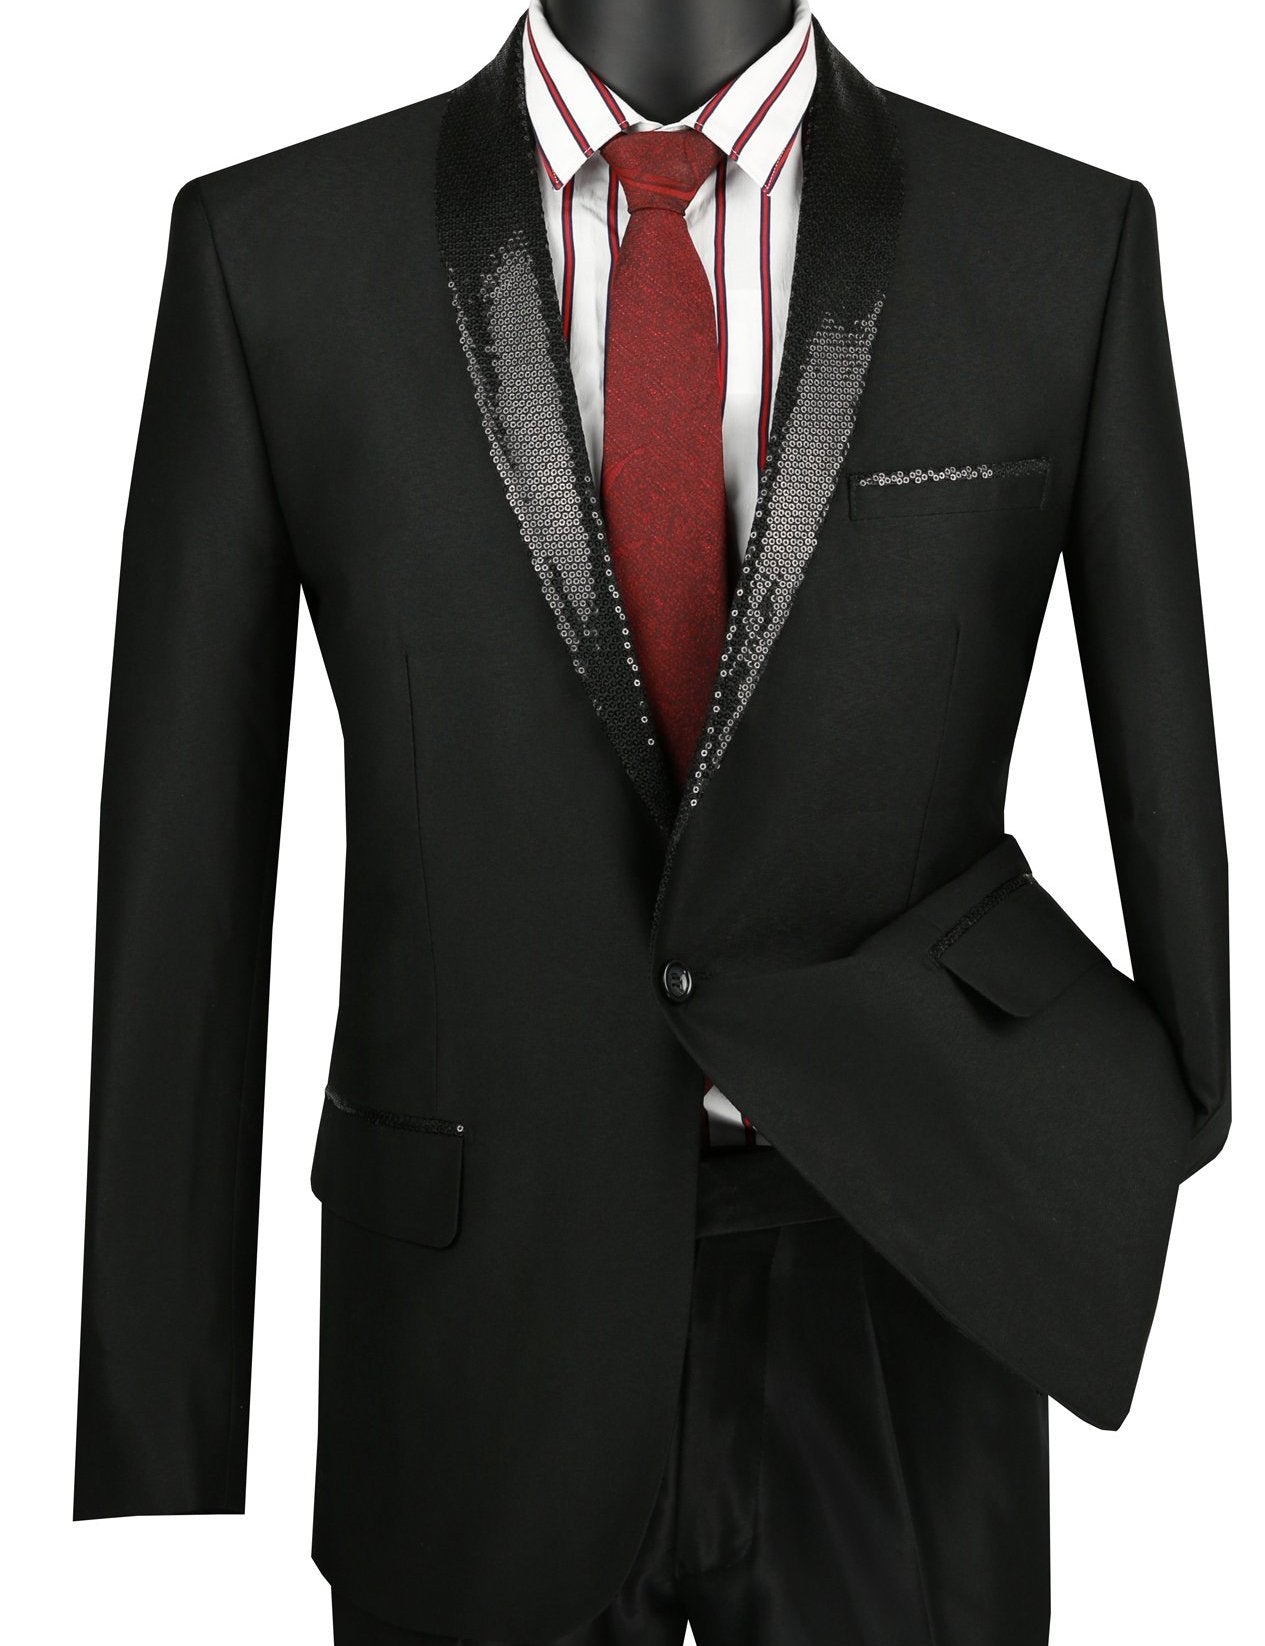 Slim Fit Black Shiny Sharkskin Party Jacket With Sequins Lapel